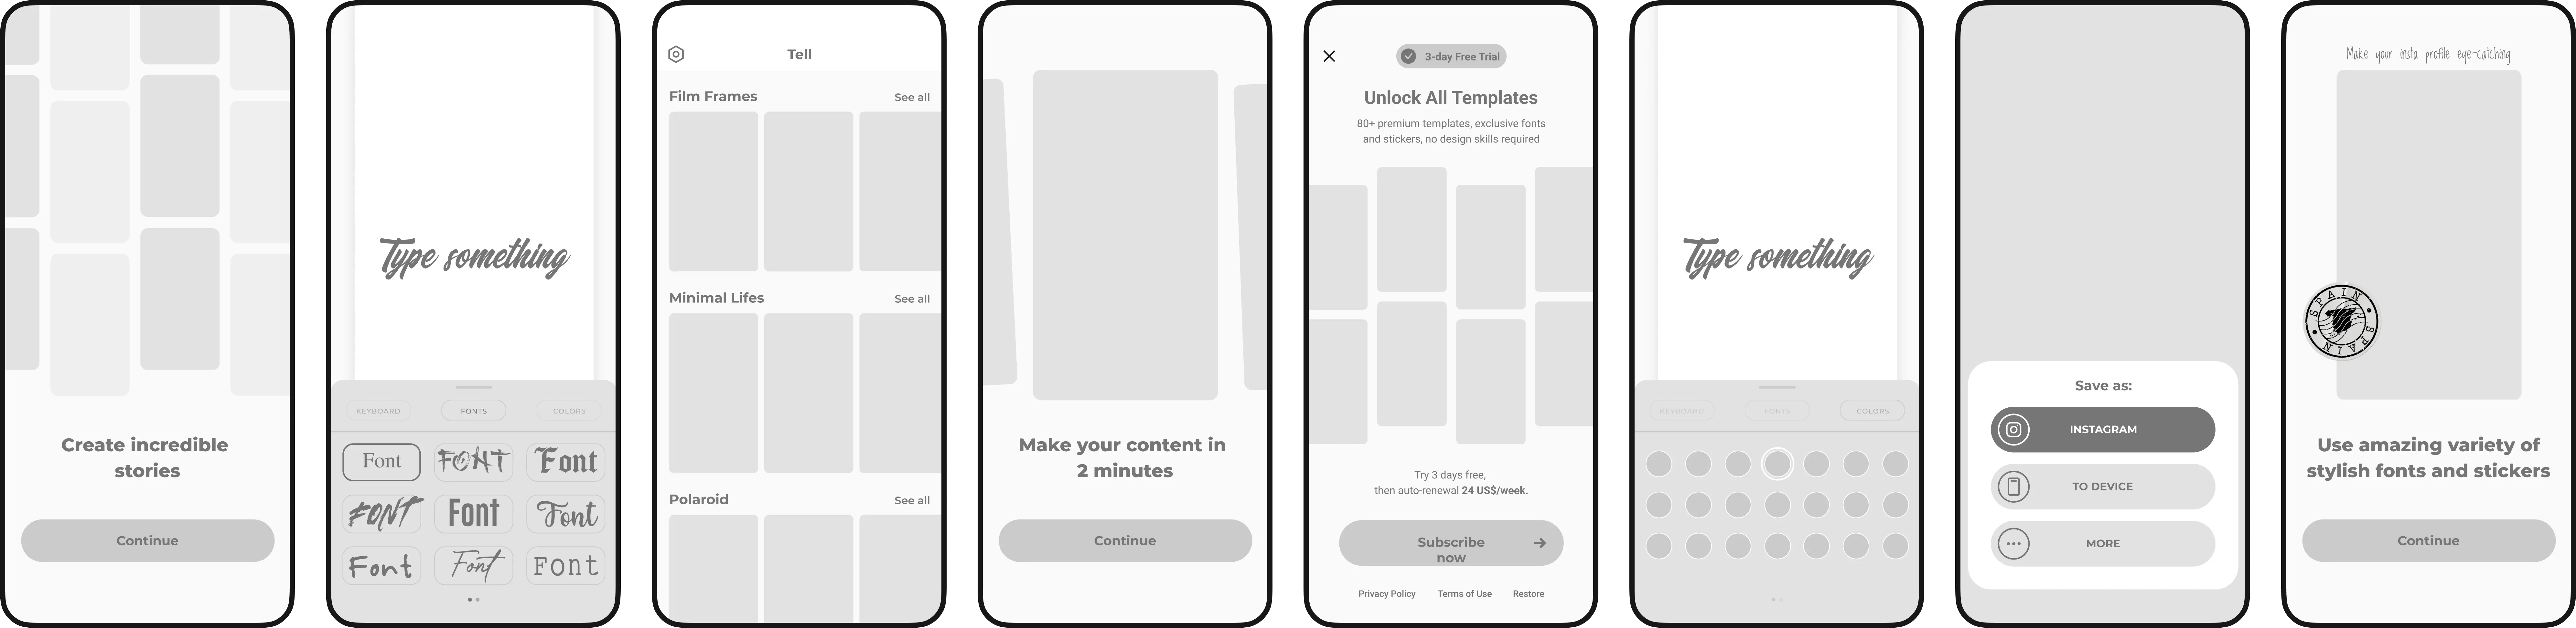 Tell first wireframe